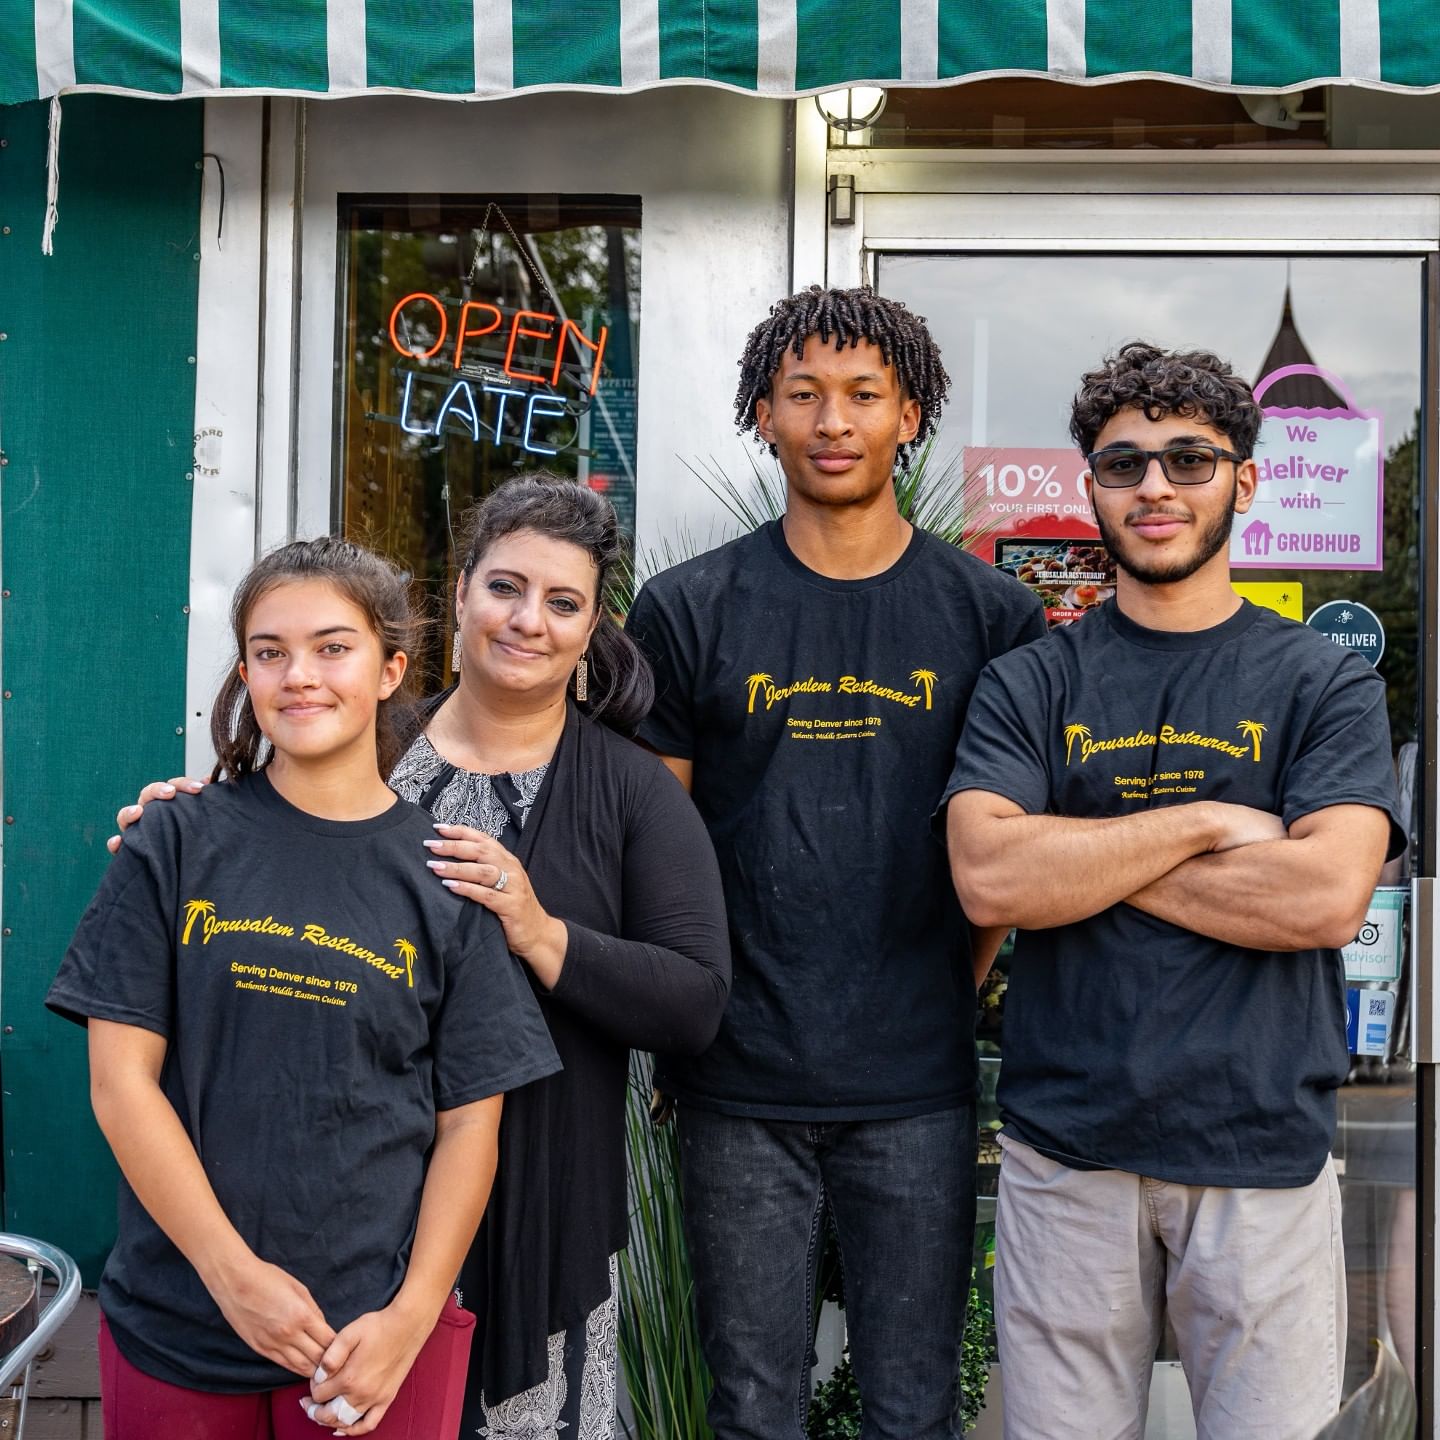 The Best Middle Eastern Restaurant Team